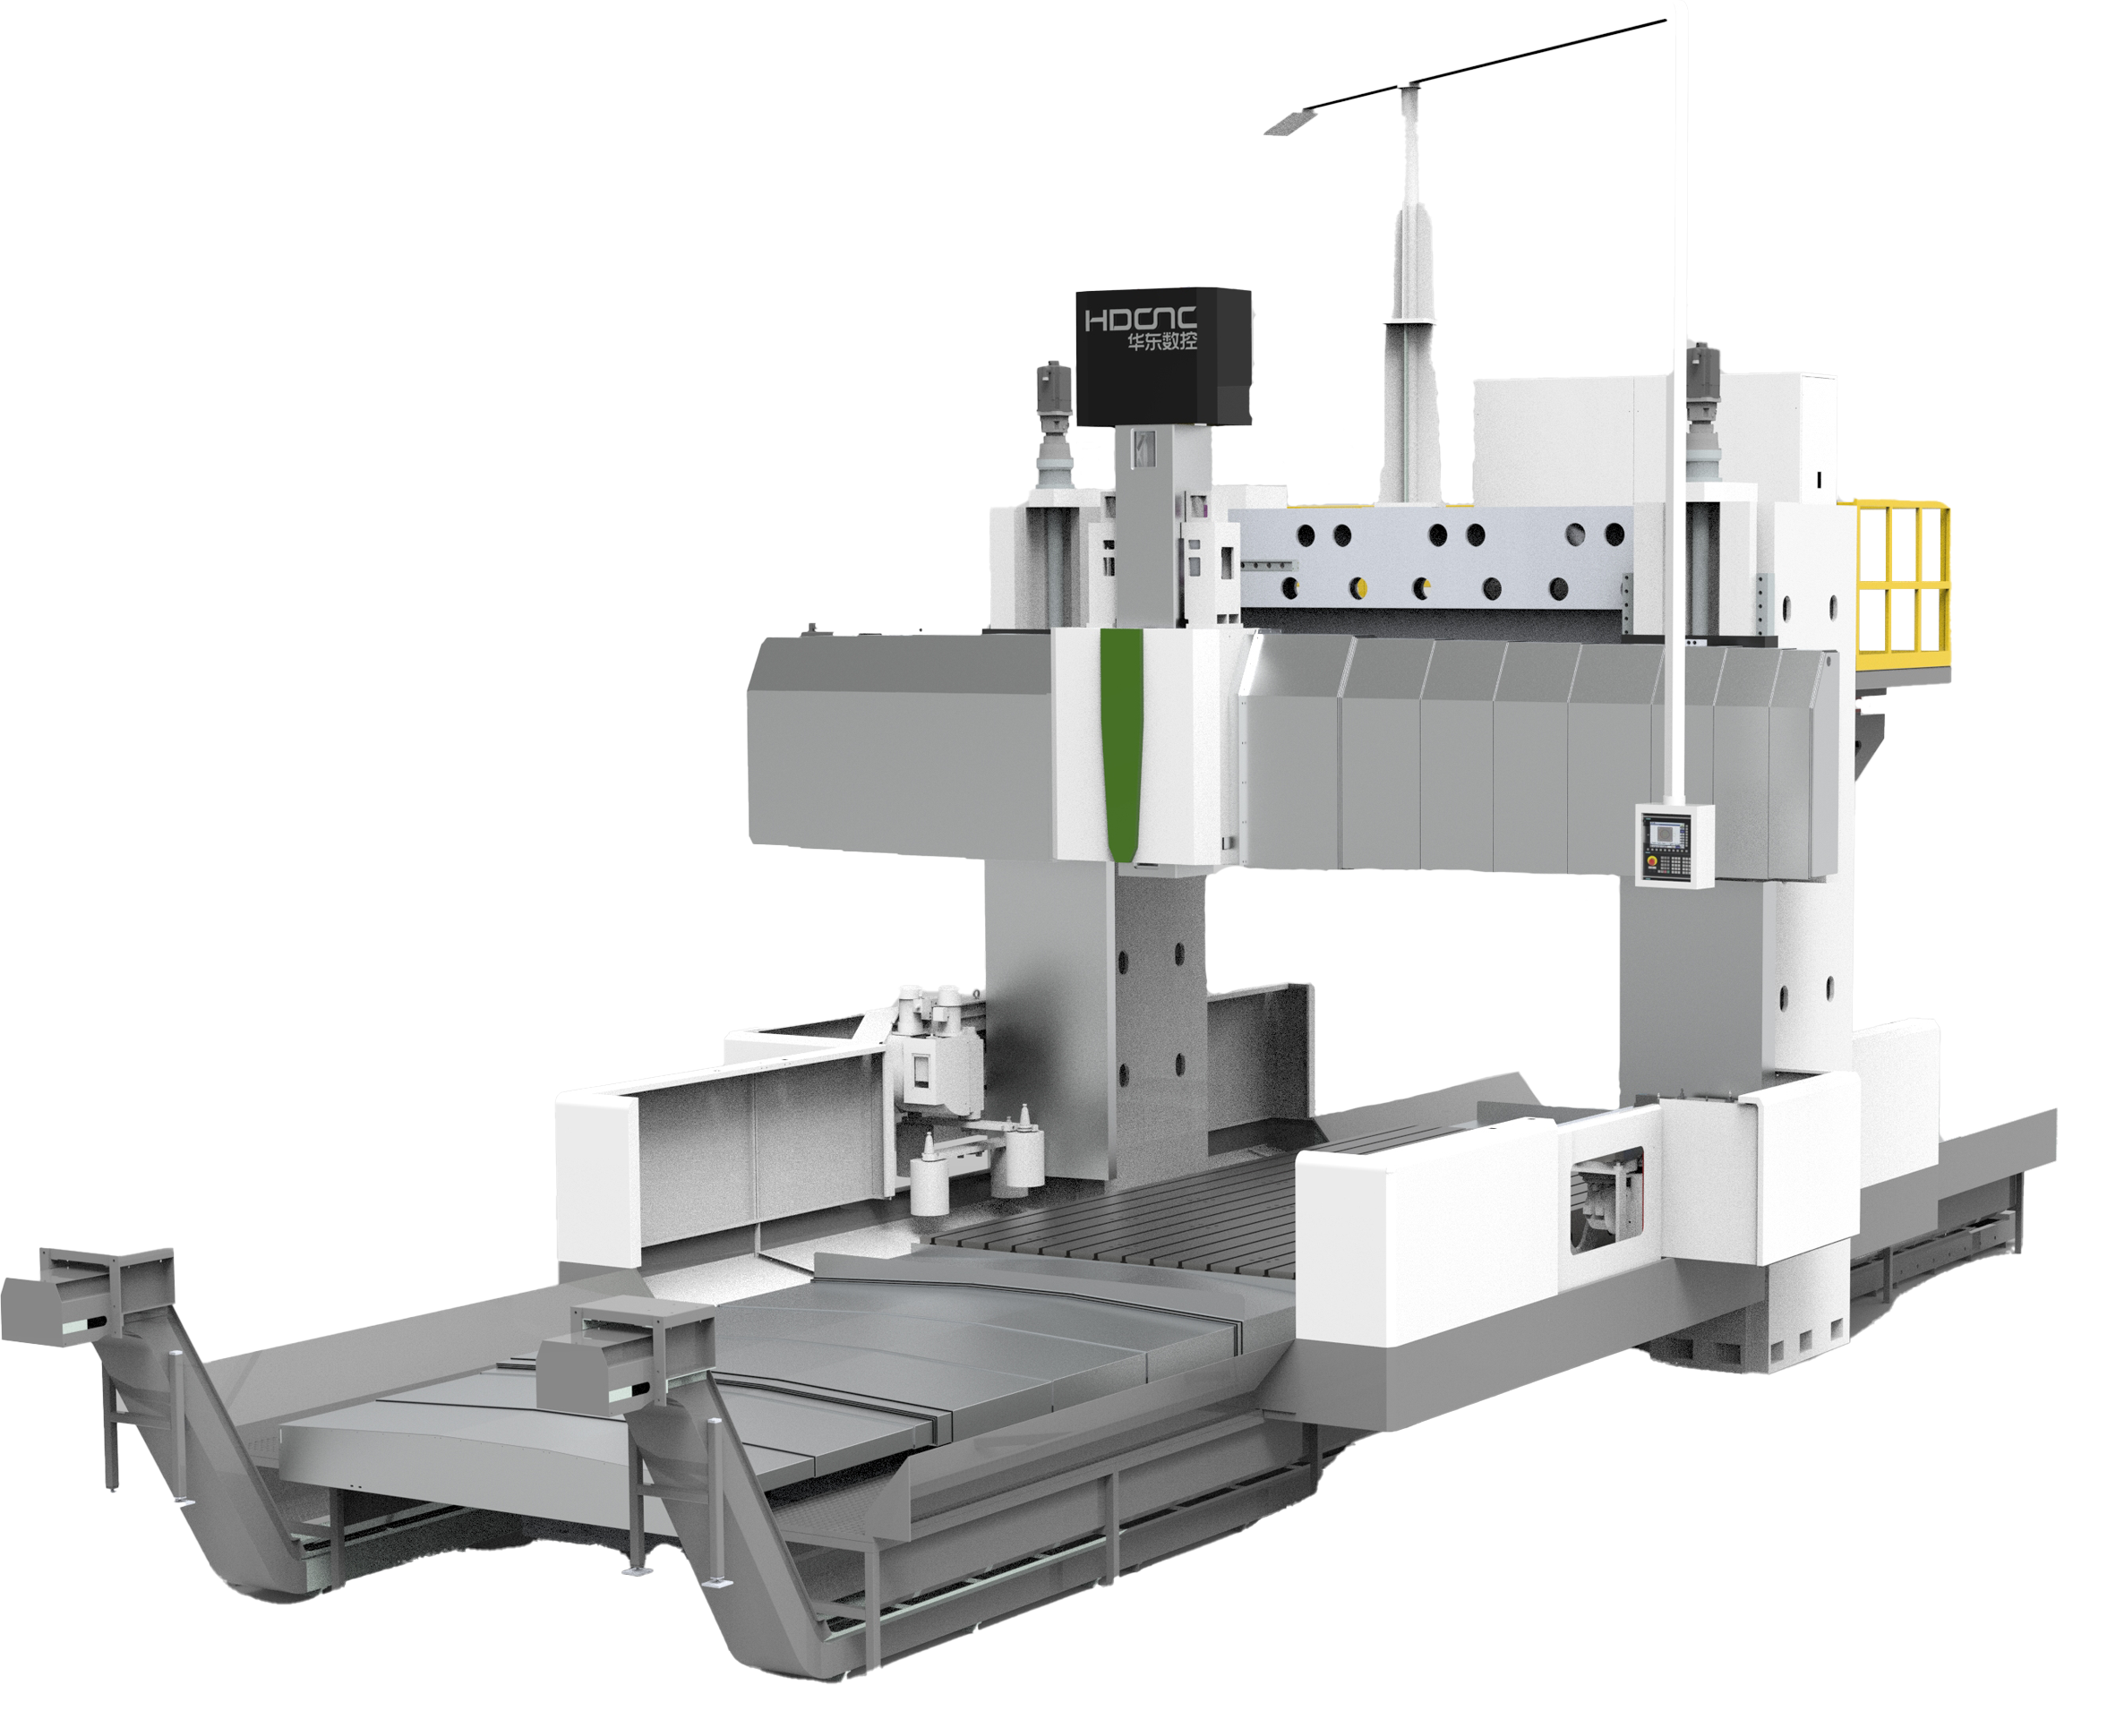 XKW21 Series Gantry CNC Milling Machine with Beam Moving